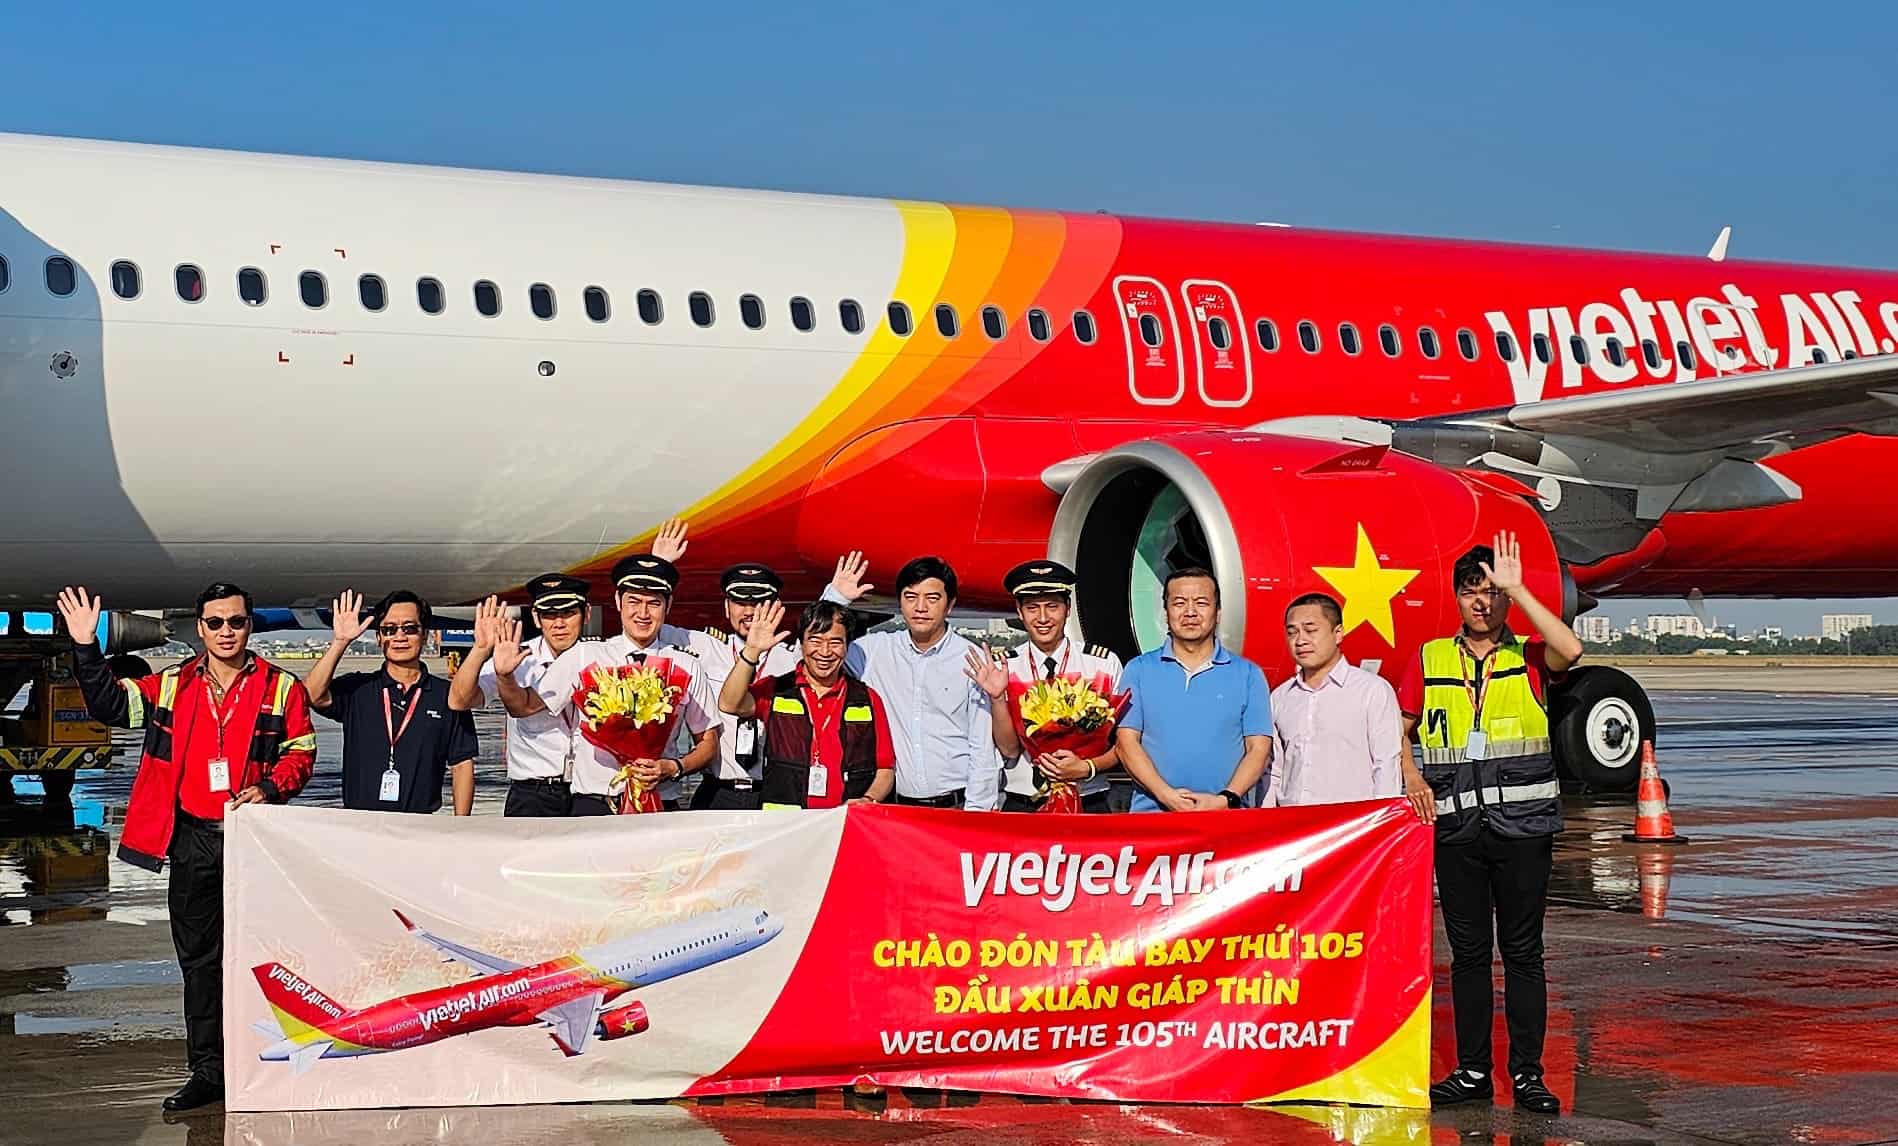 Vietjet enhances fleet capacity with the arrival of 105th aircraft